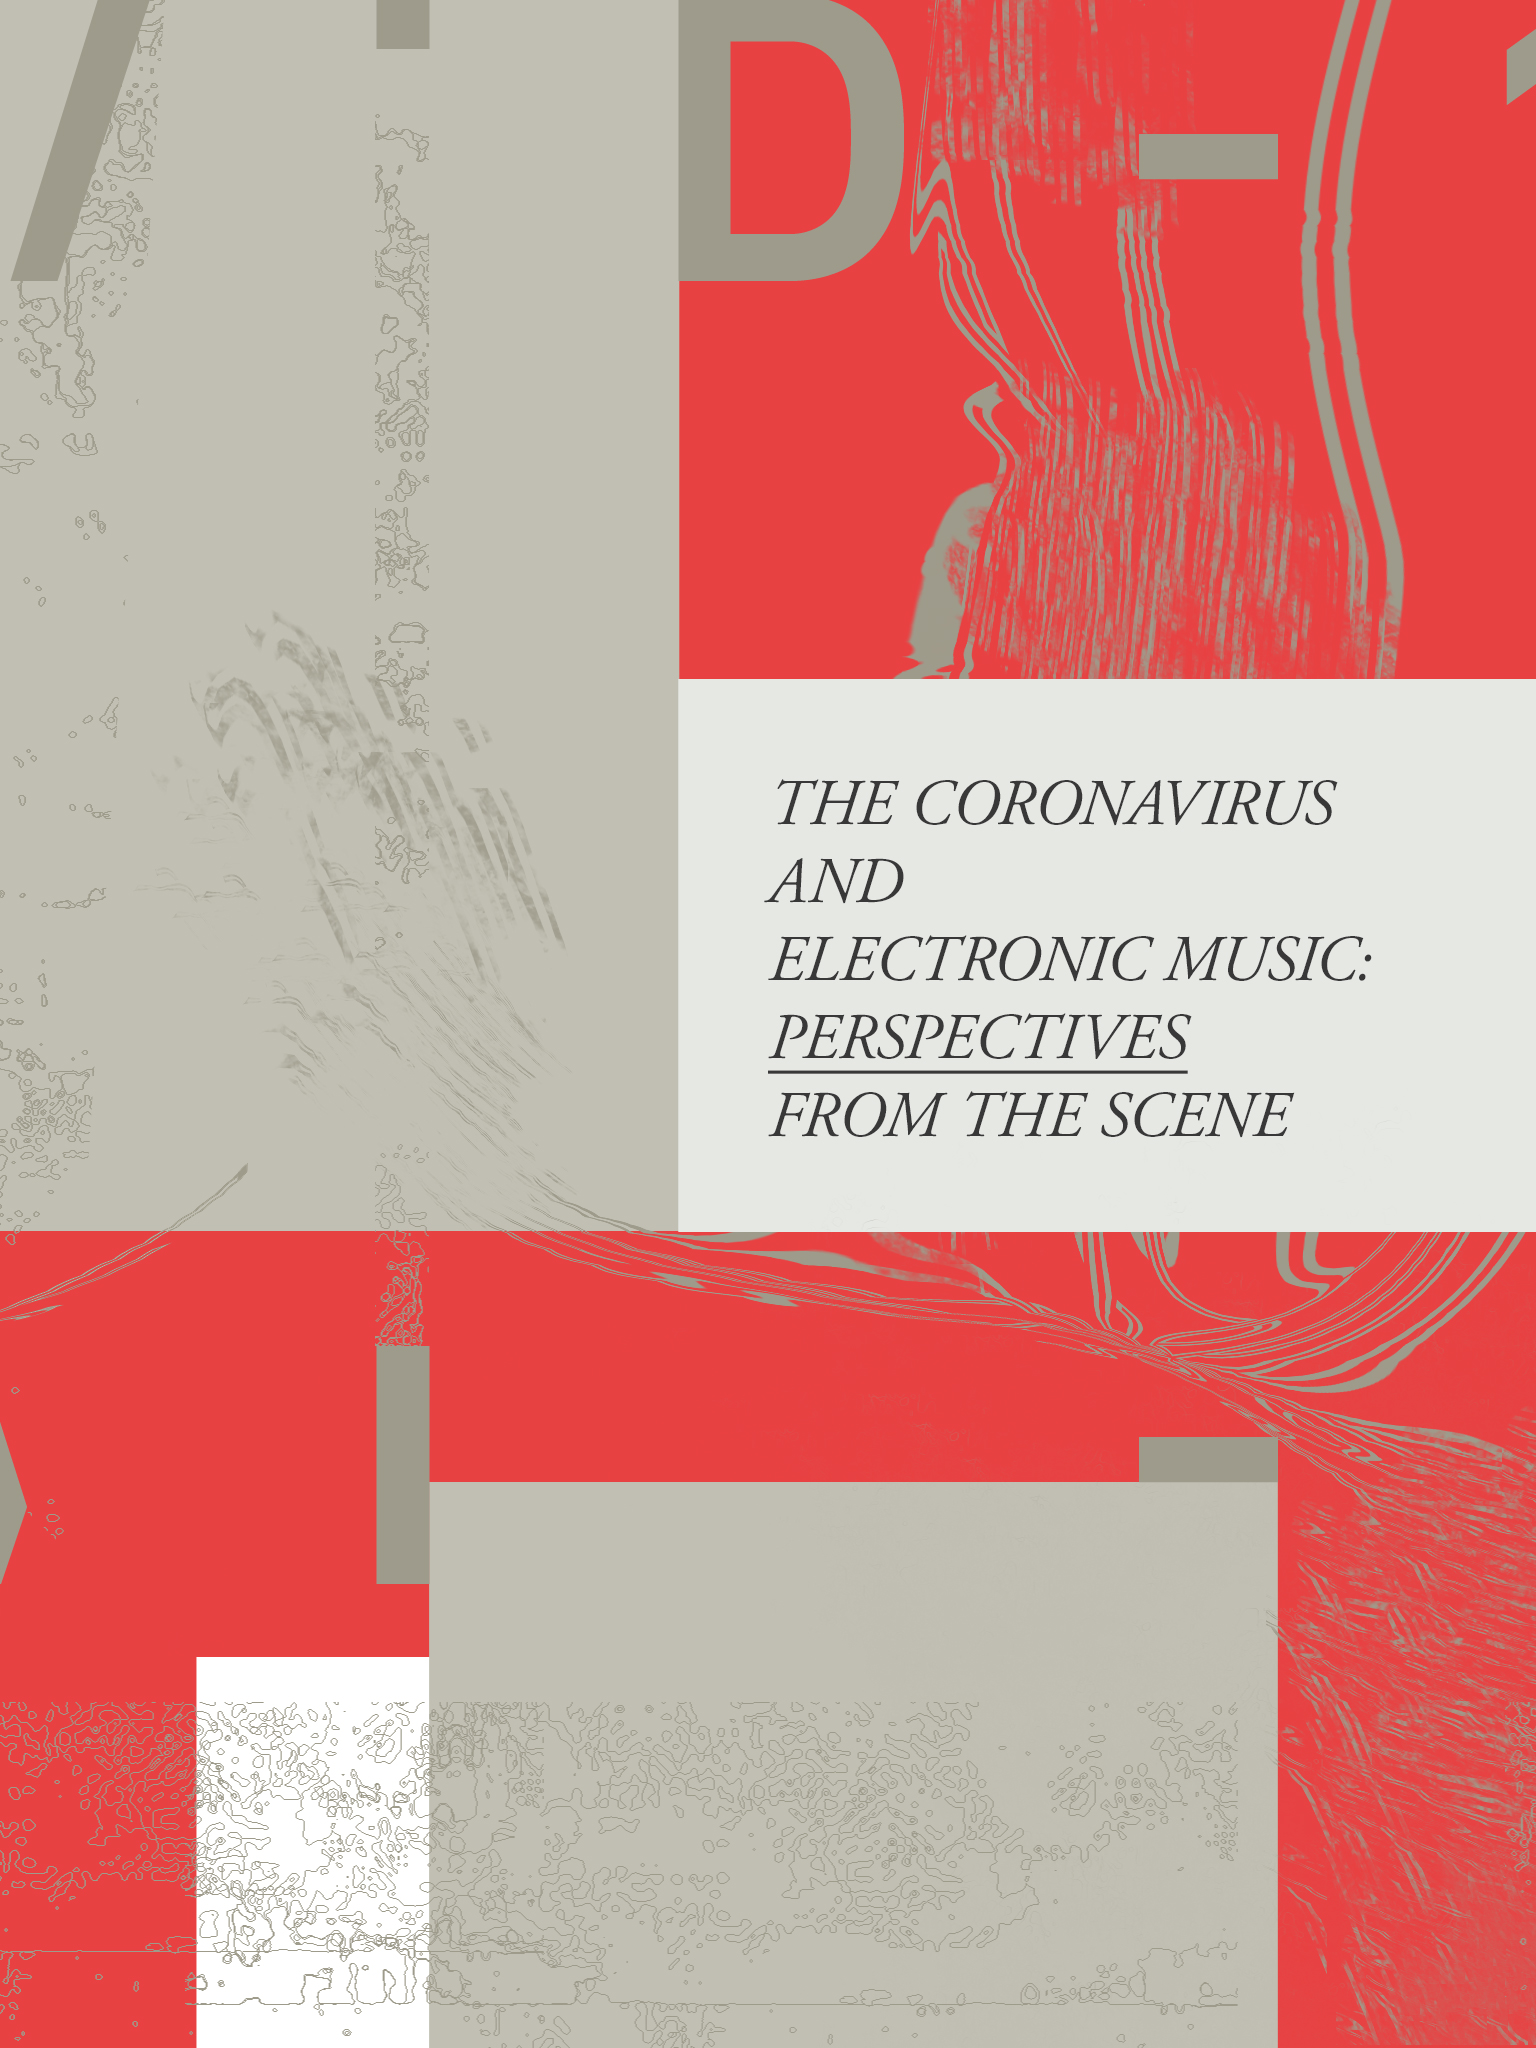 The Coronavirus And Electronic Music: Perspectives From The Scene